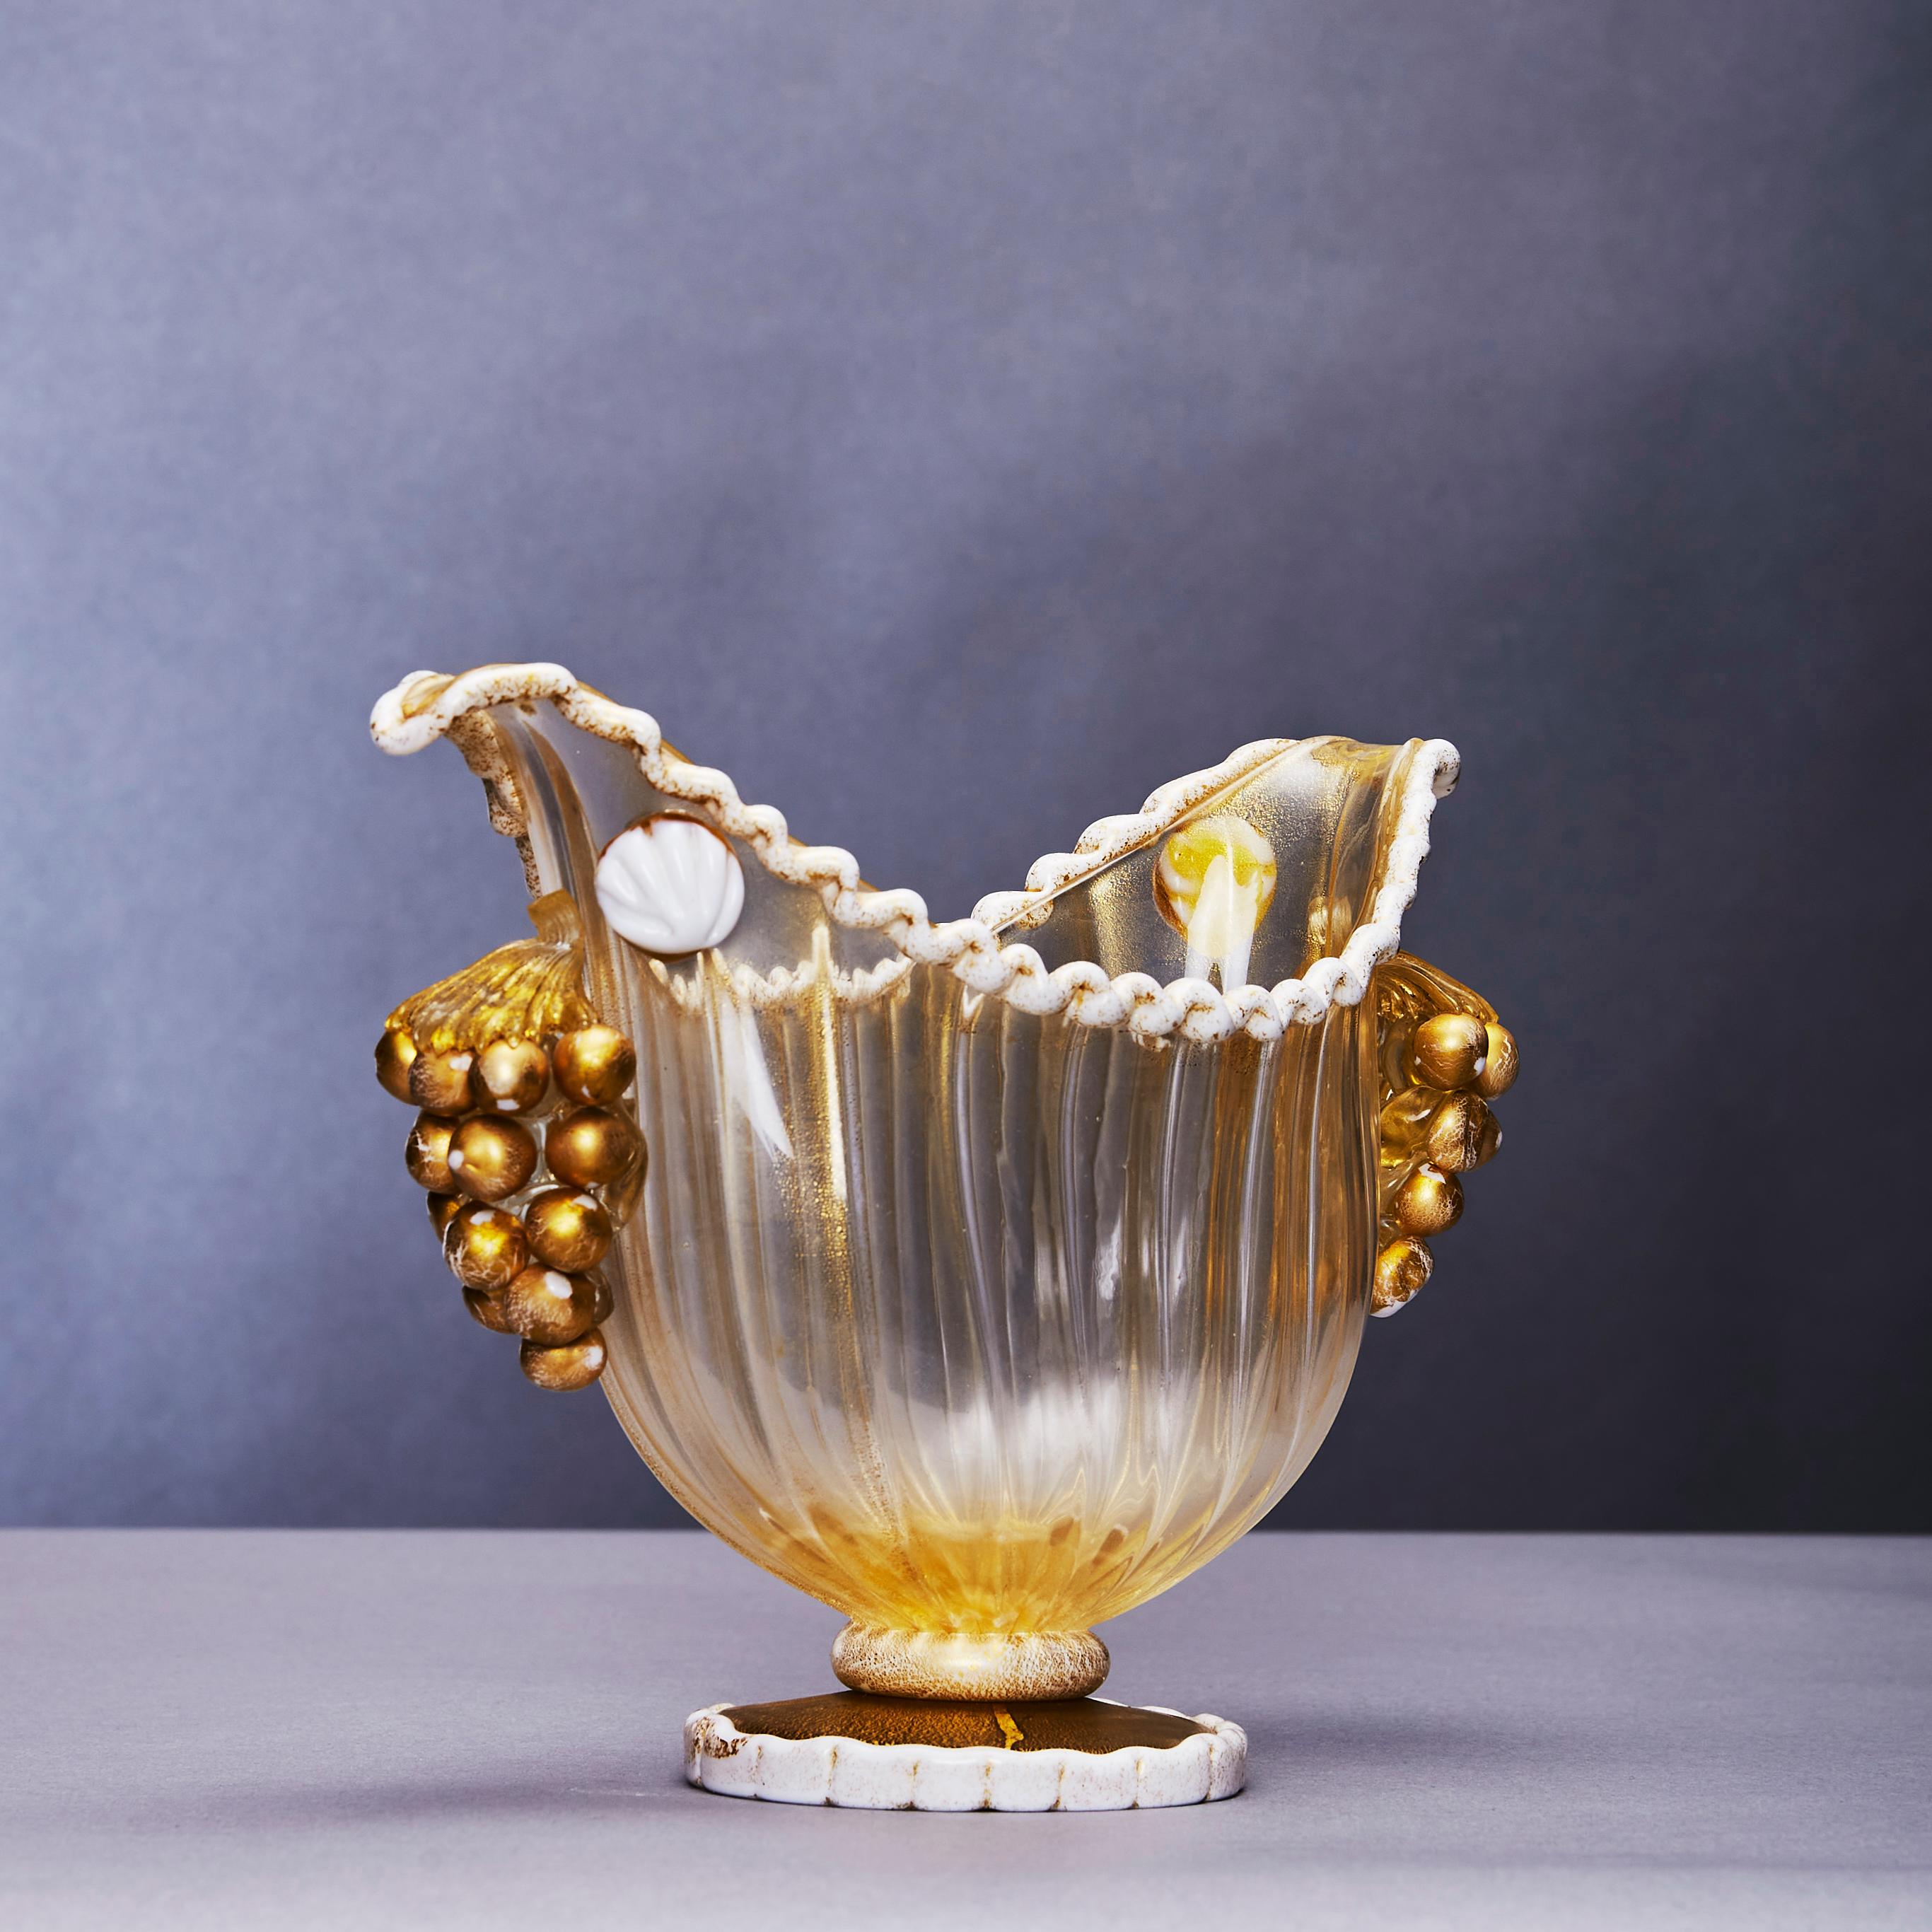 Classically shaped oval bowl is a master class of technique and elegance, designed by Ercole Barovier (1889-1974) circa 1948 for Barovier, Toso & Co. It has an edging of white on the opening of the vessel. The handles are formed into the sides of